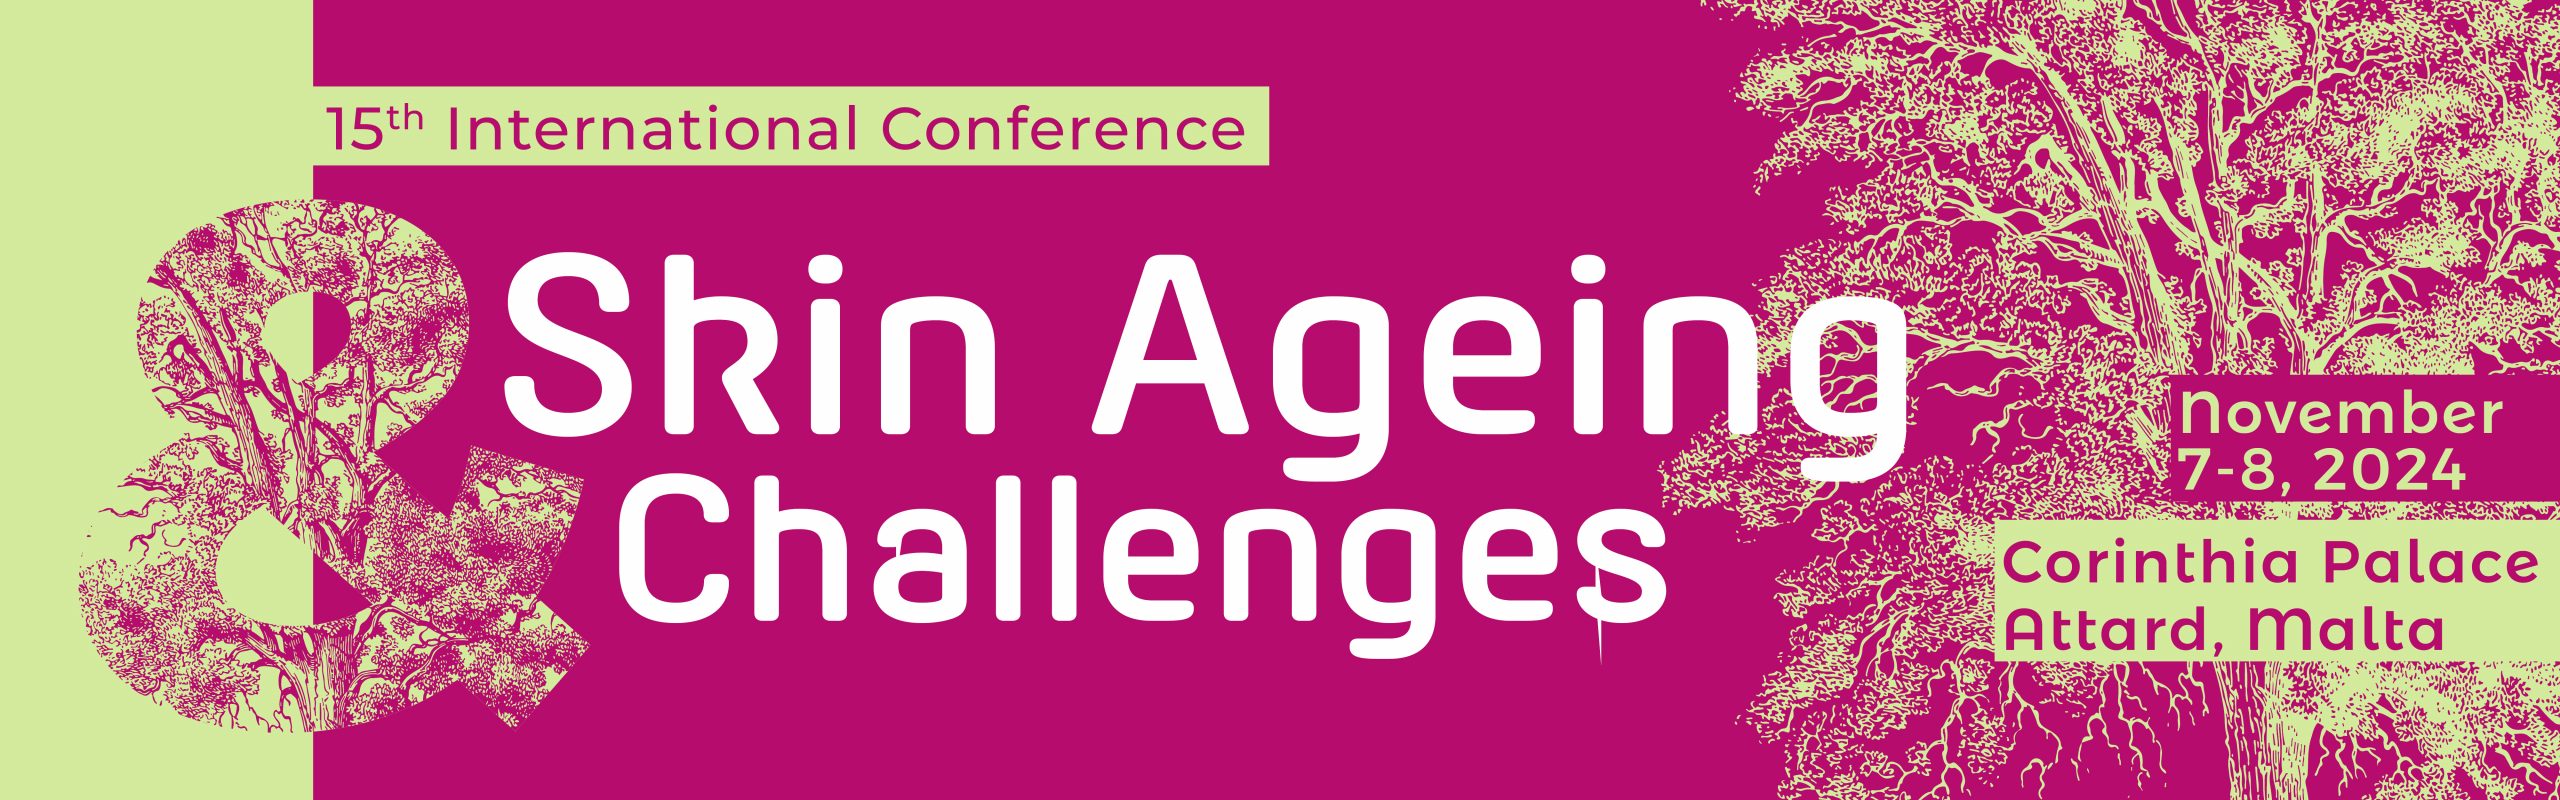 Skin Aging & Challenges 2024